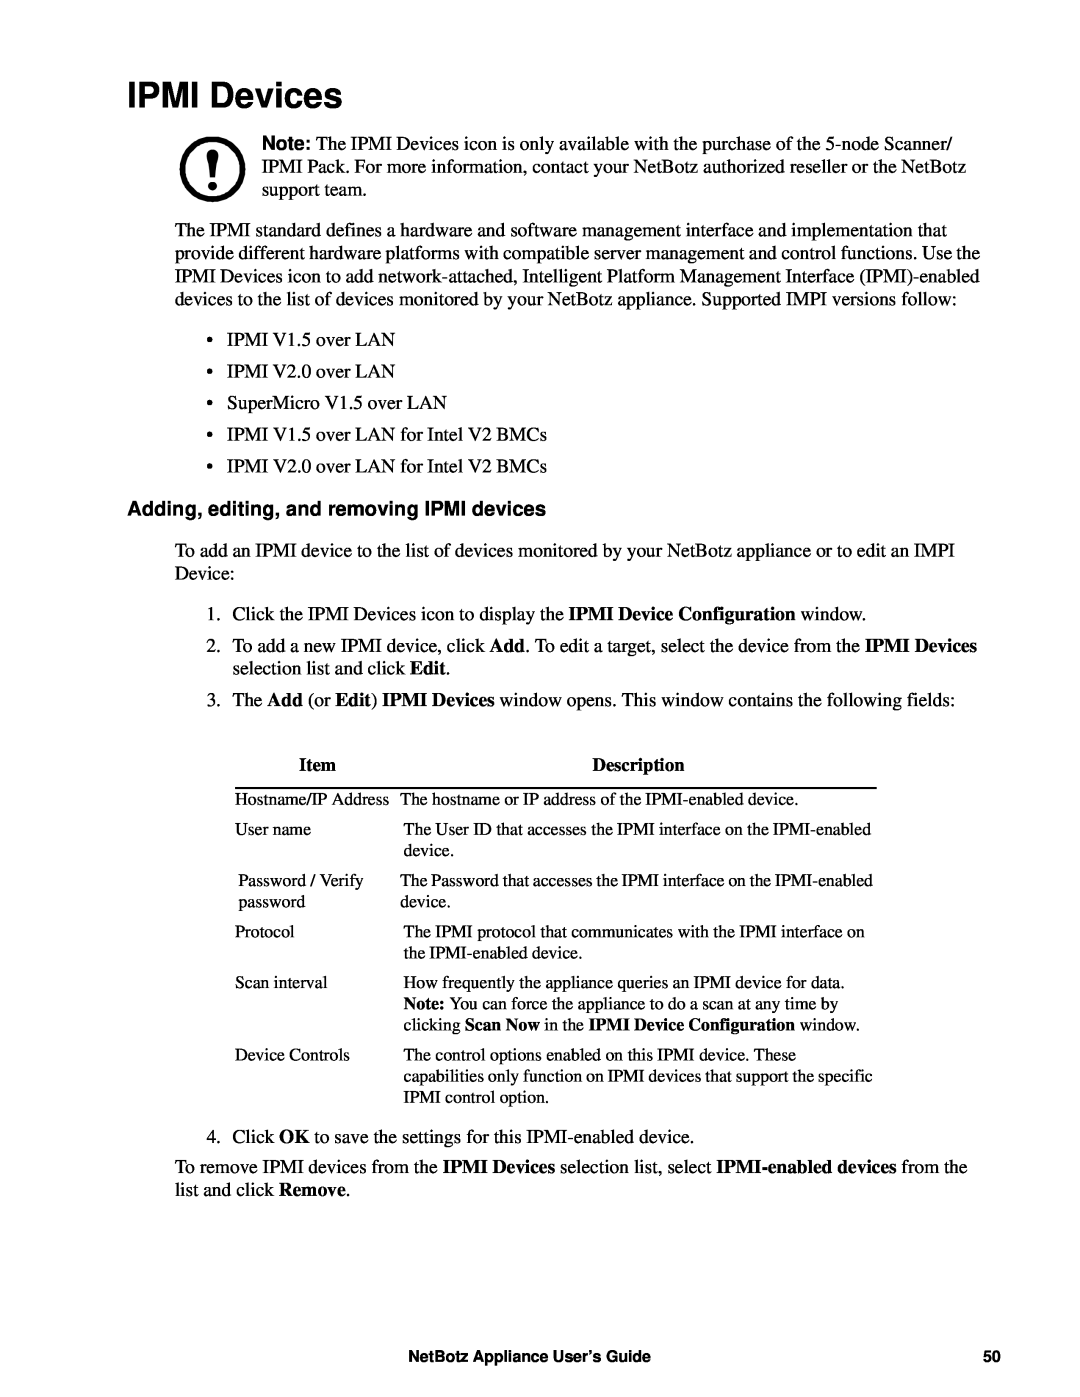 APC NBRK0550, NBRK0450, NBRK0570 manual IPMI Devices, Adding, editing, and removing IPMI devices 